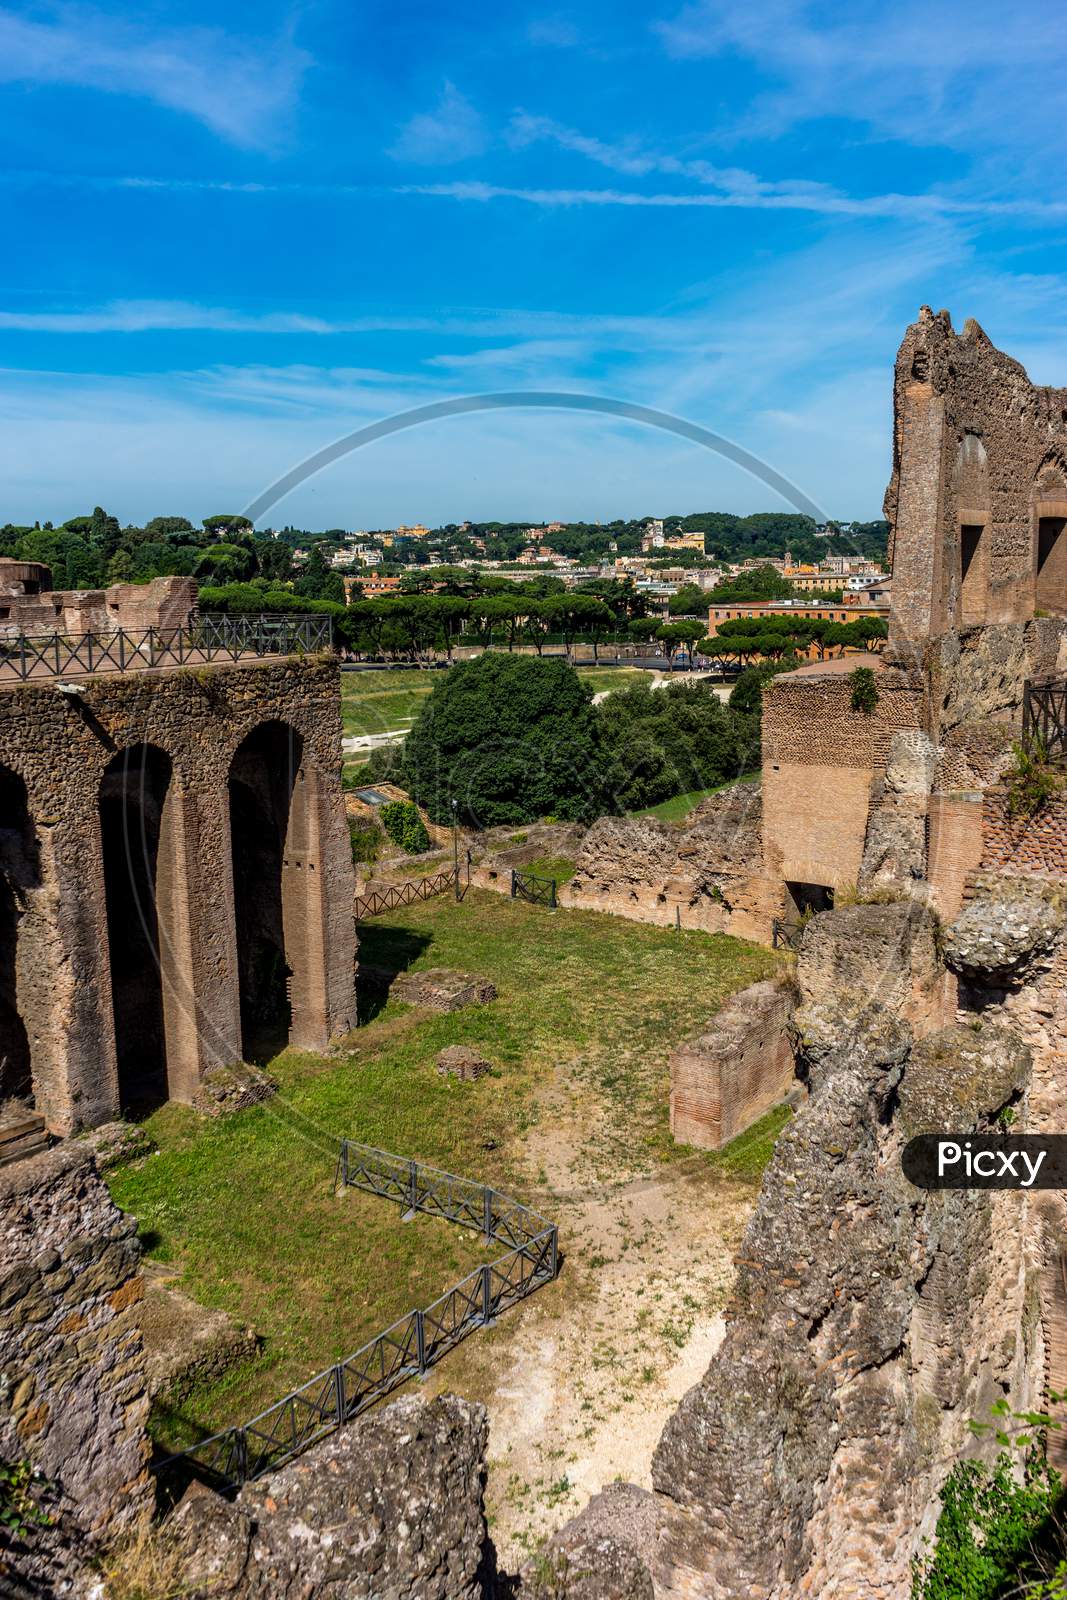 The Ancient Ruins At The Roman Forum, Palatine Hill In Rome